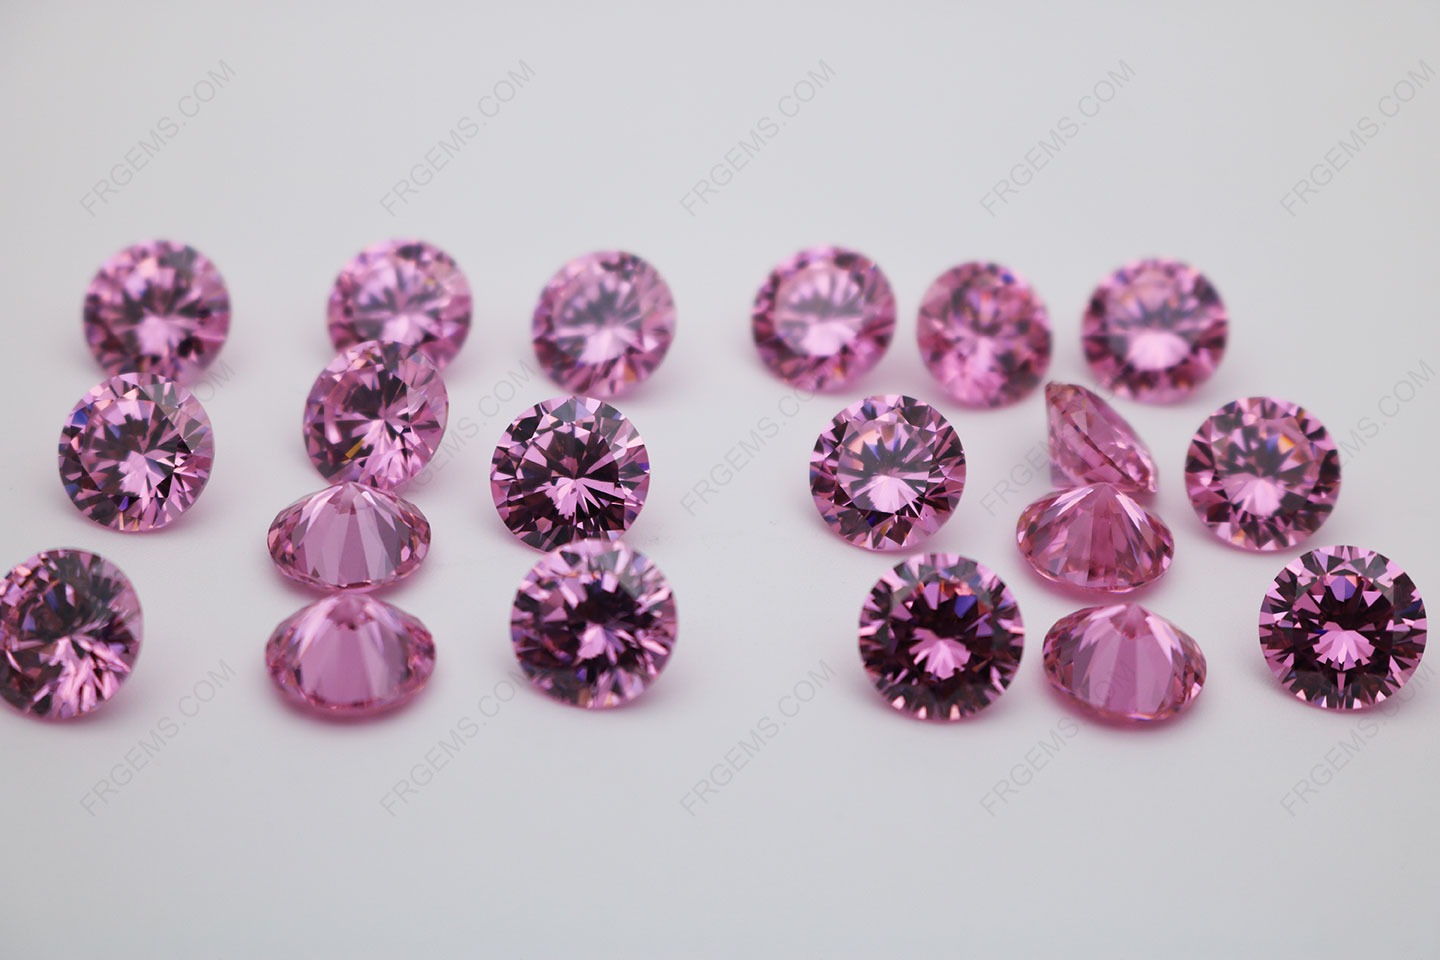 Cubic_Zirconia_Pink_Round_Shape_diamond_faceted_cut_10mm_stones_Supplier_IMG_0159